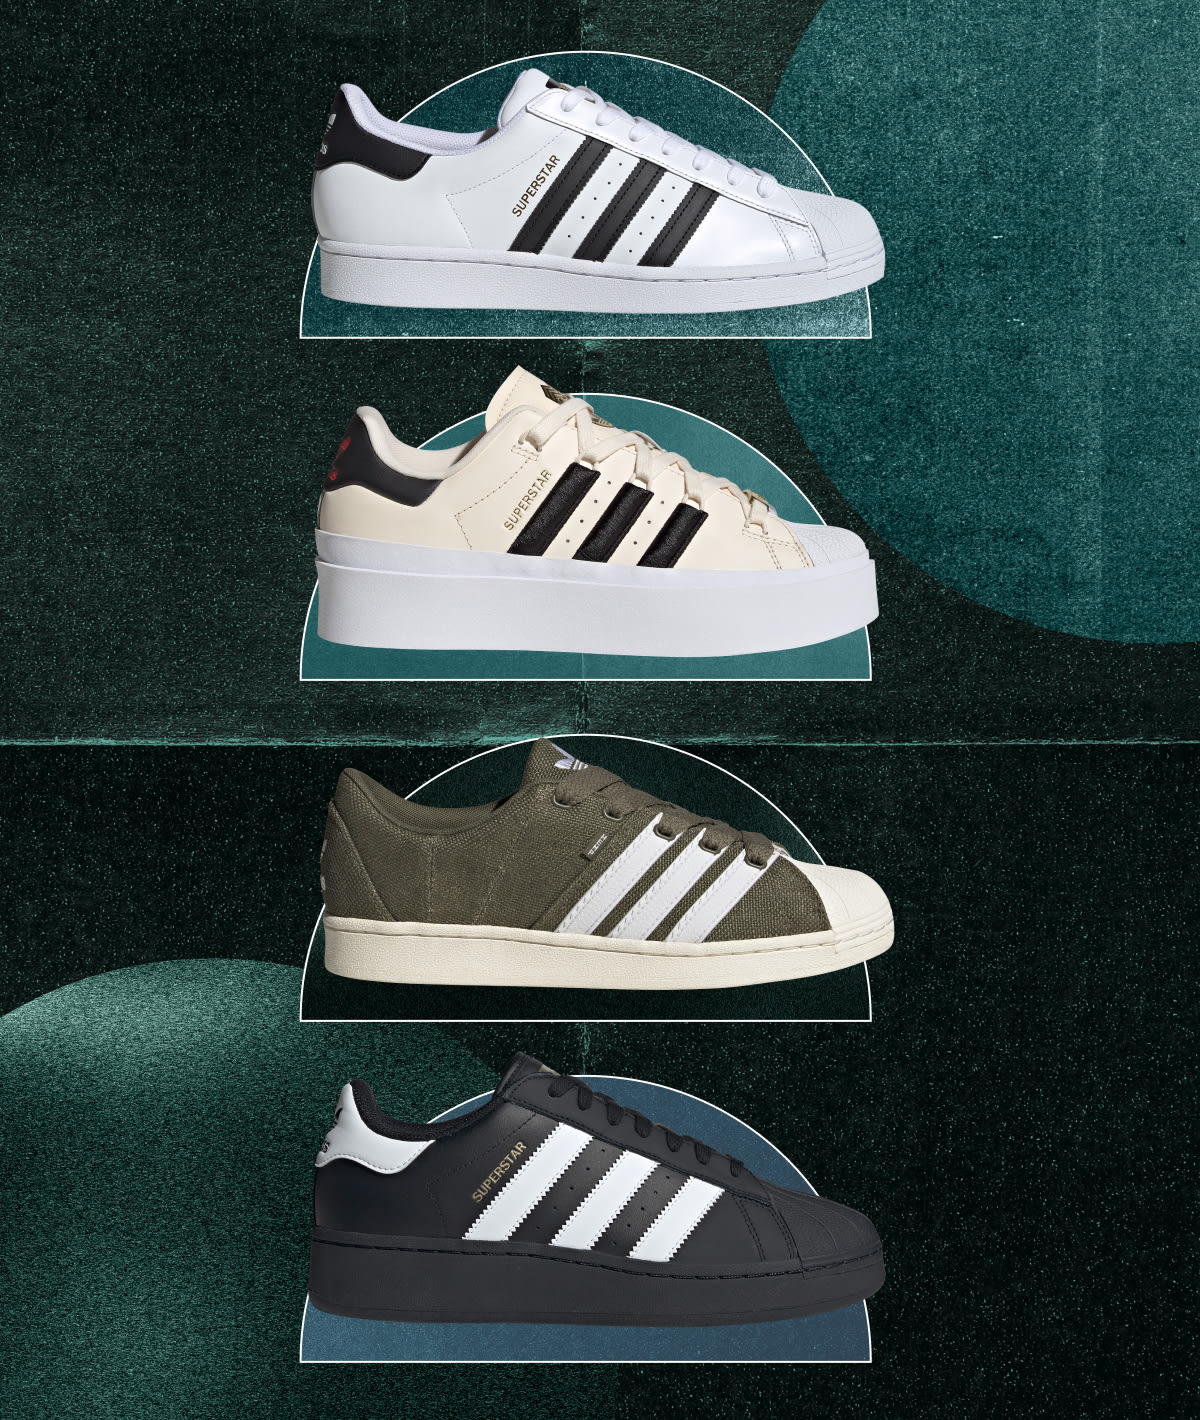 How adidas Superstar Shoes Fit? The Guide for All